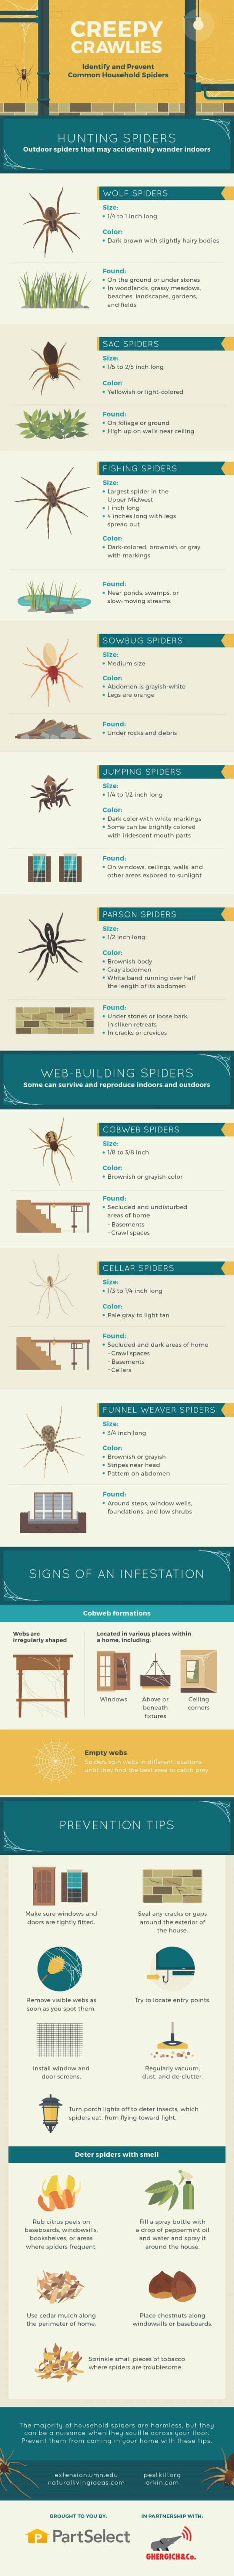 How to identify and prevent spiders from coming into your home